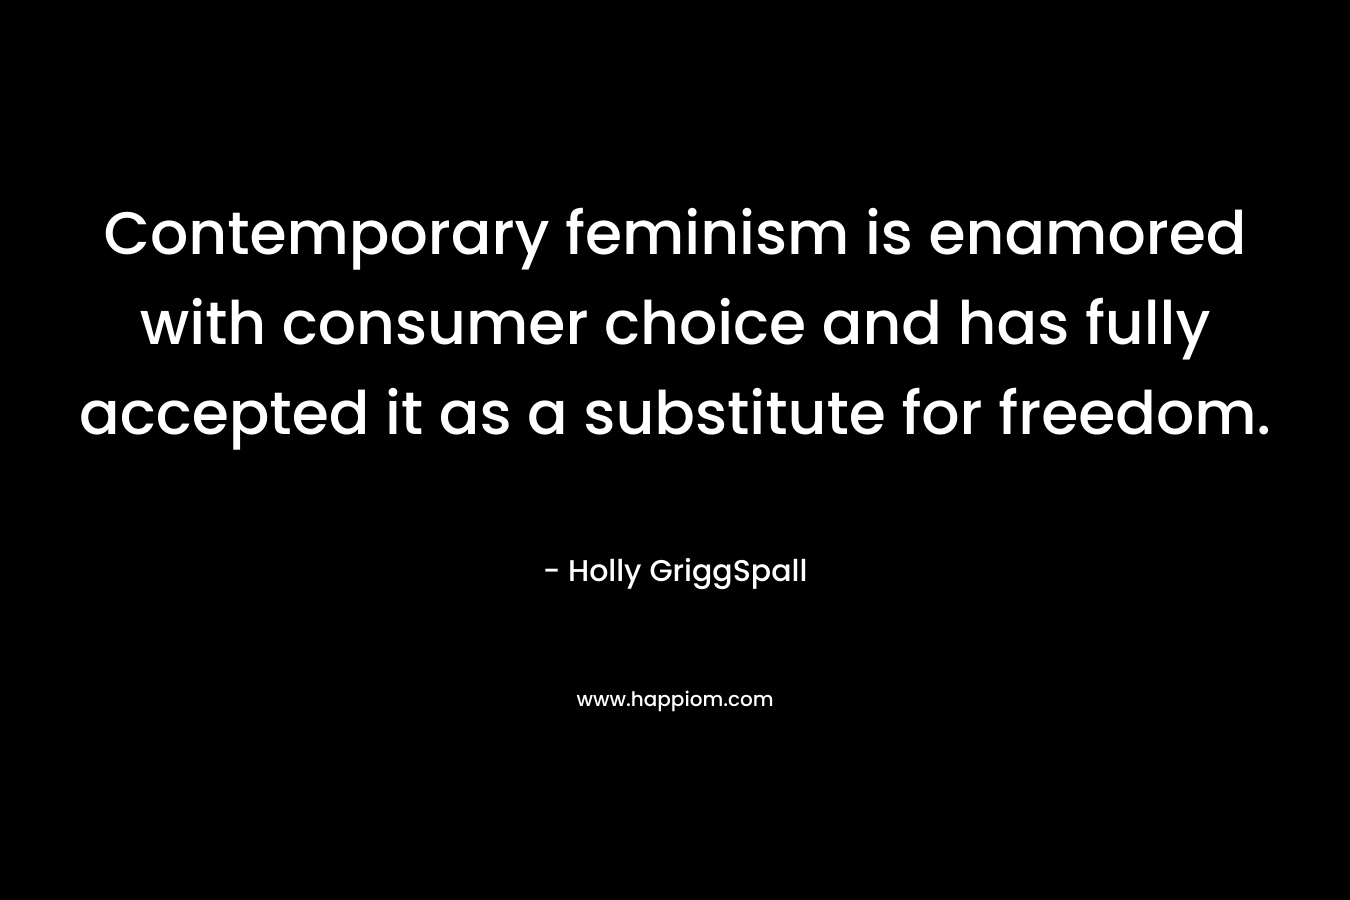 Contemporary feminism is enamored with consumer choice and has fully accepted it as a substitute for freedom.